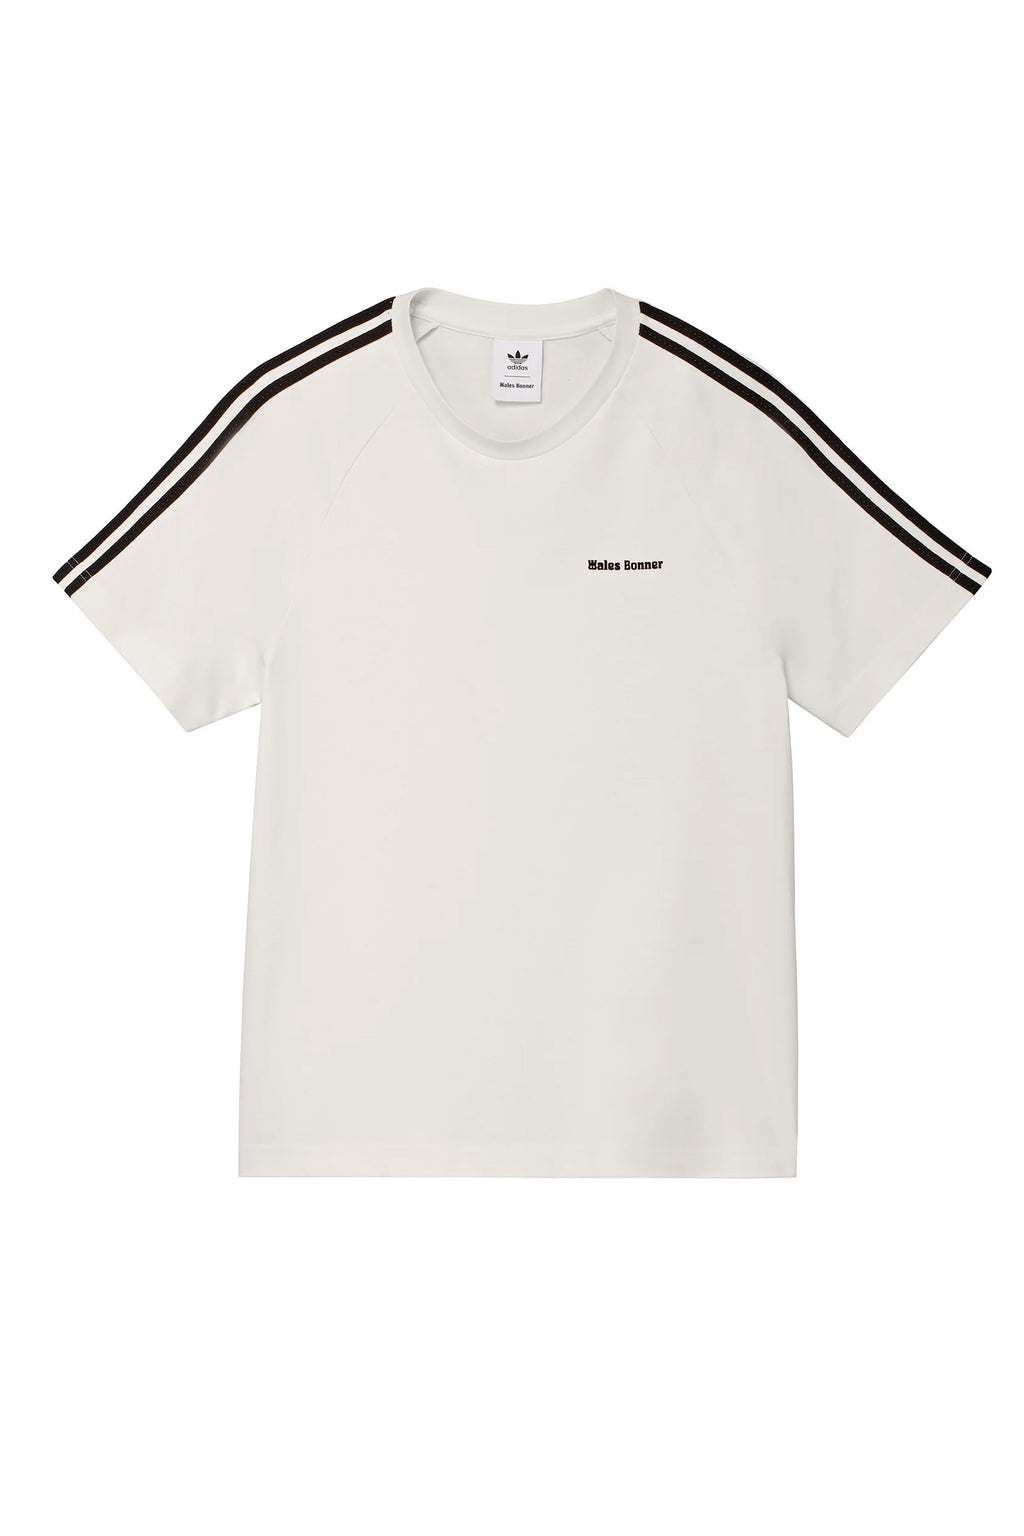 ADIDAS ORIGINALS BY NUBIAN S/S WHT TEE WALES WB FW23 - BONNER 